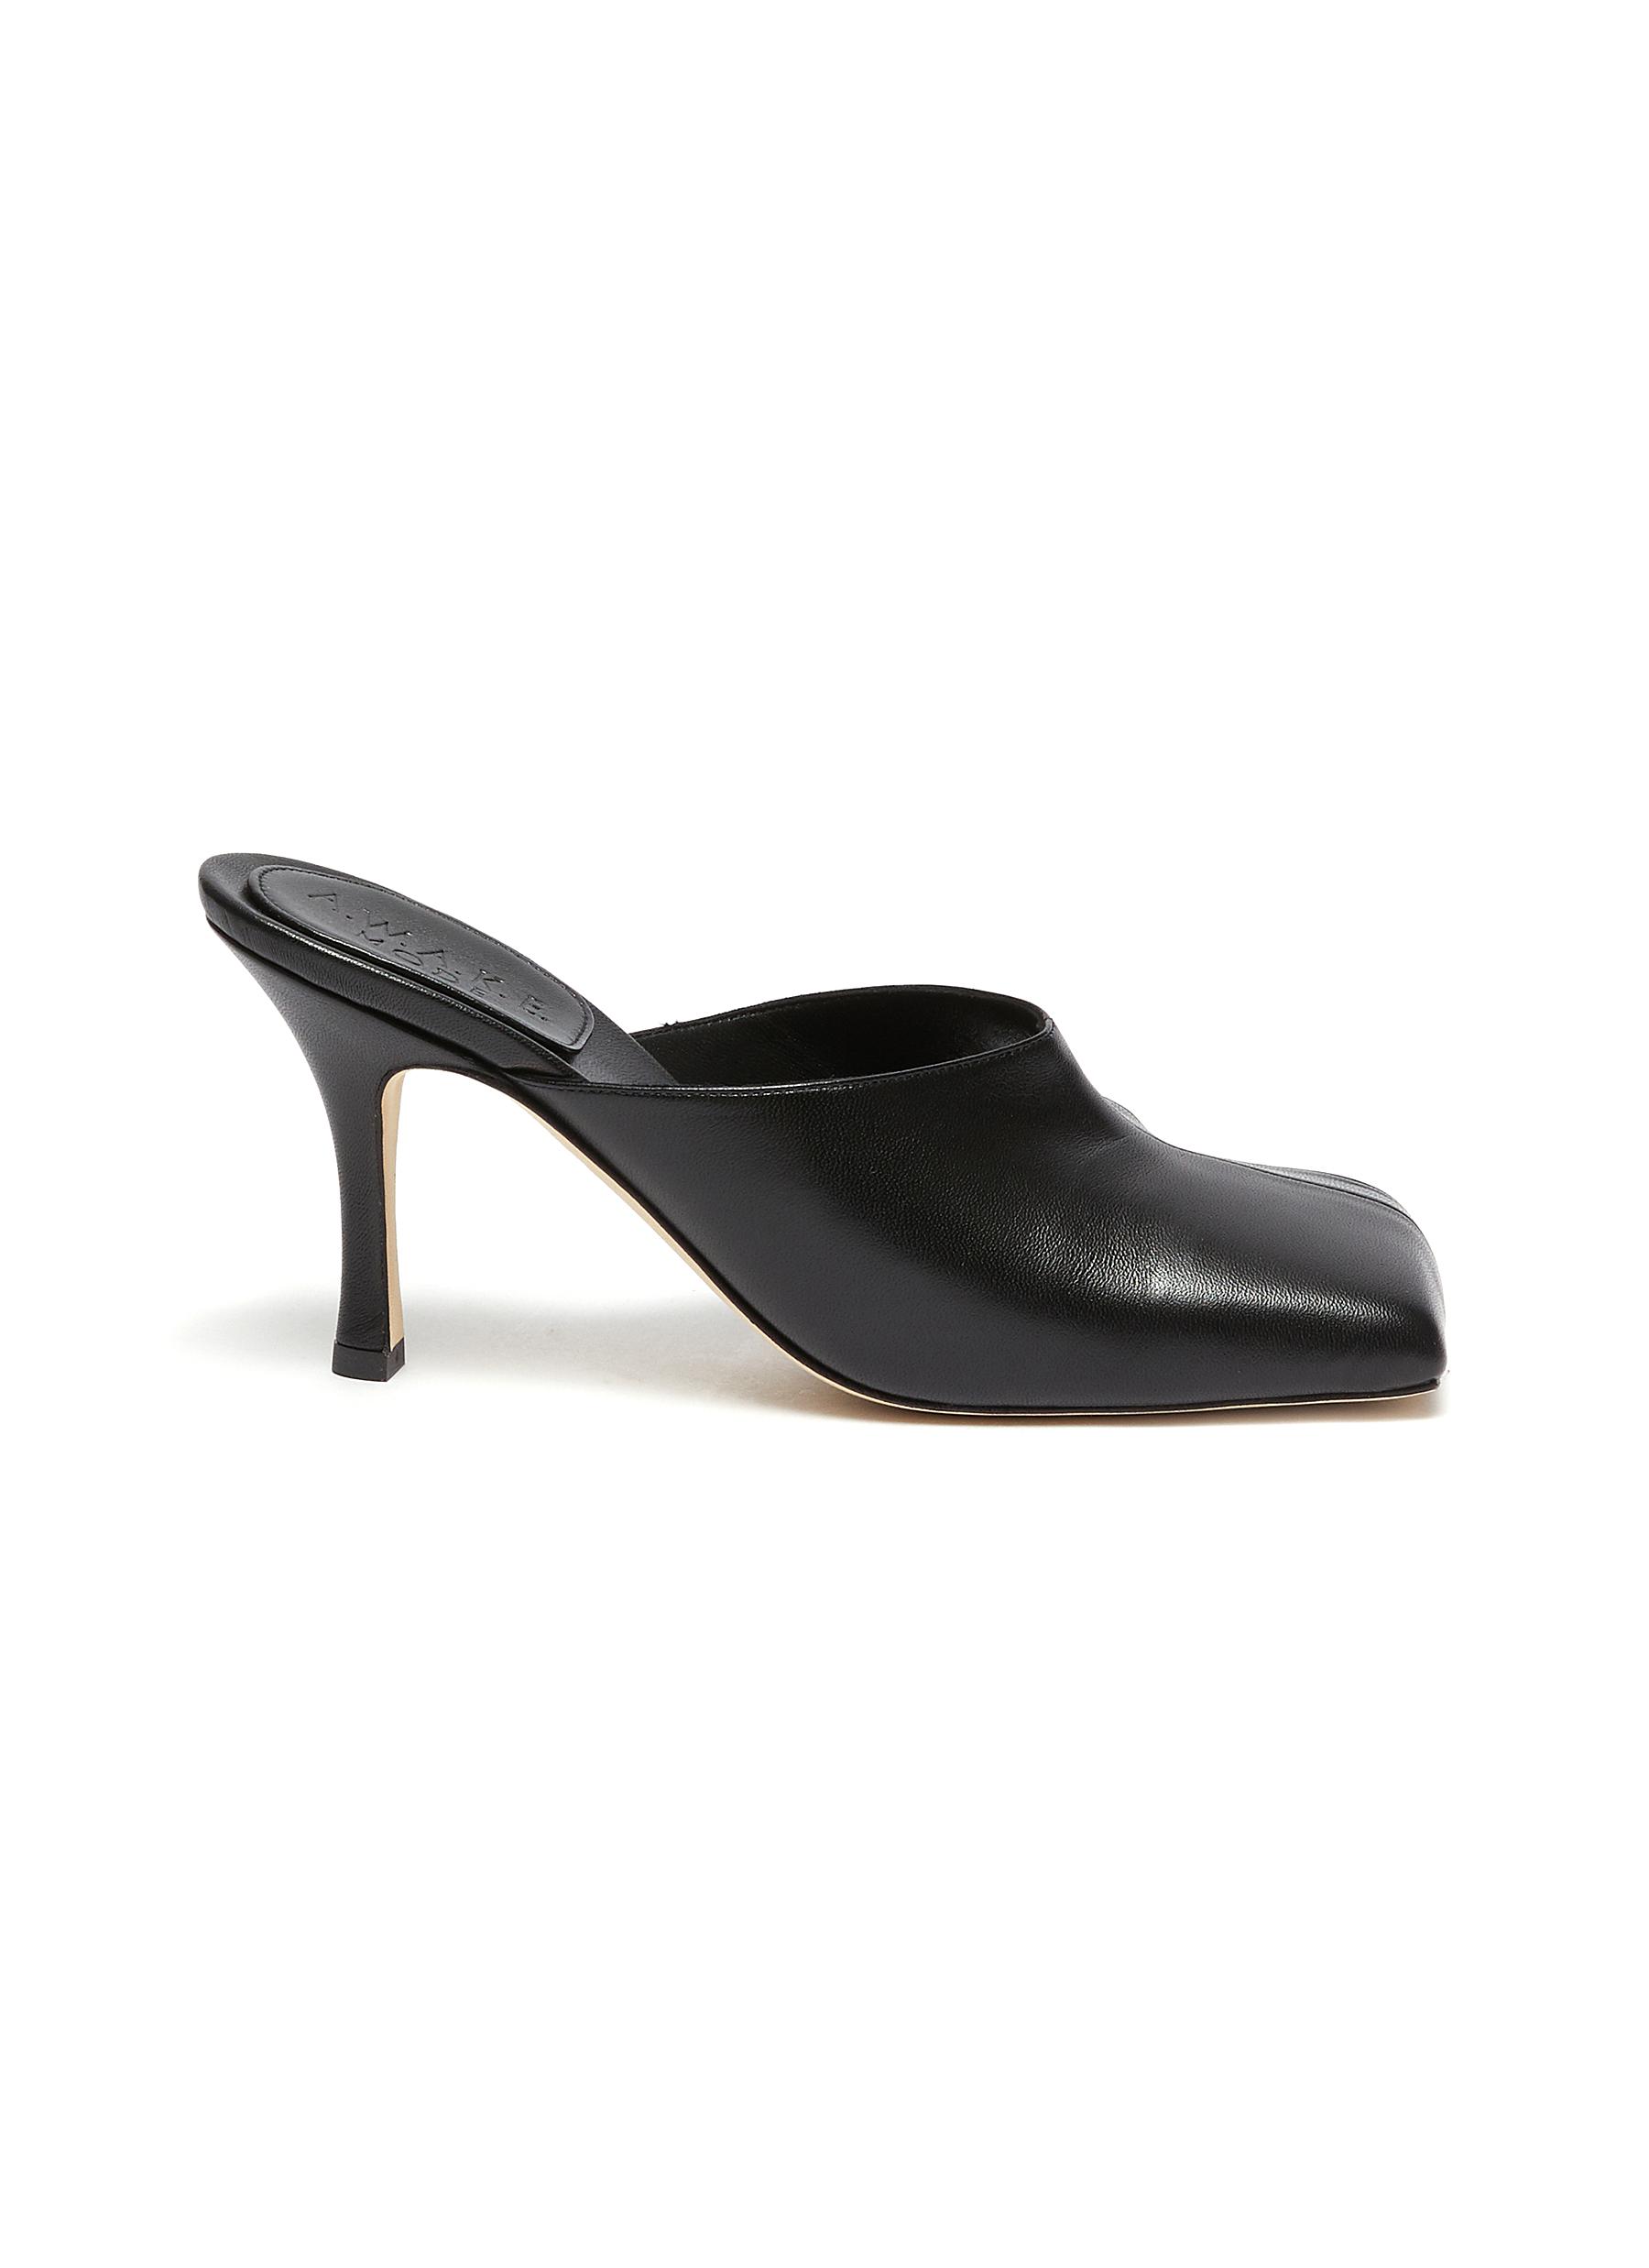 'Mary' Asymmetric Curved Square Toe Leather Mules